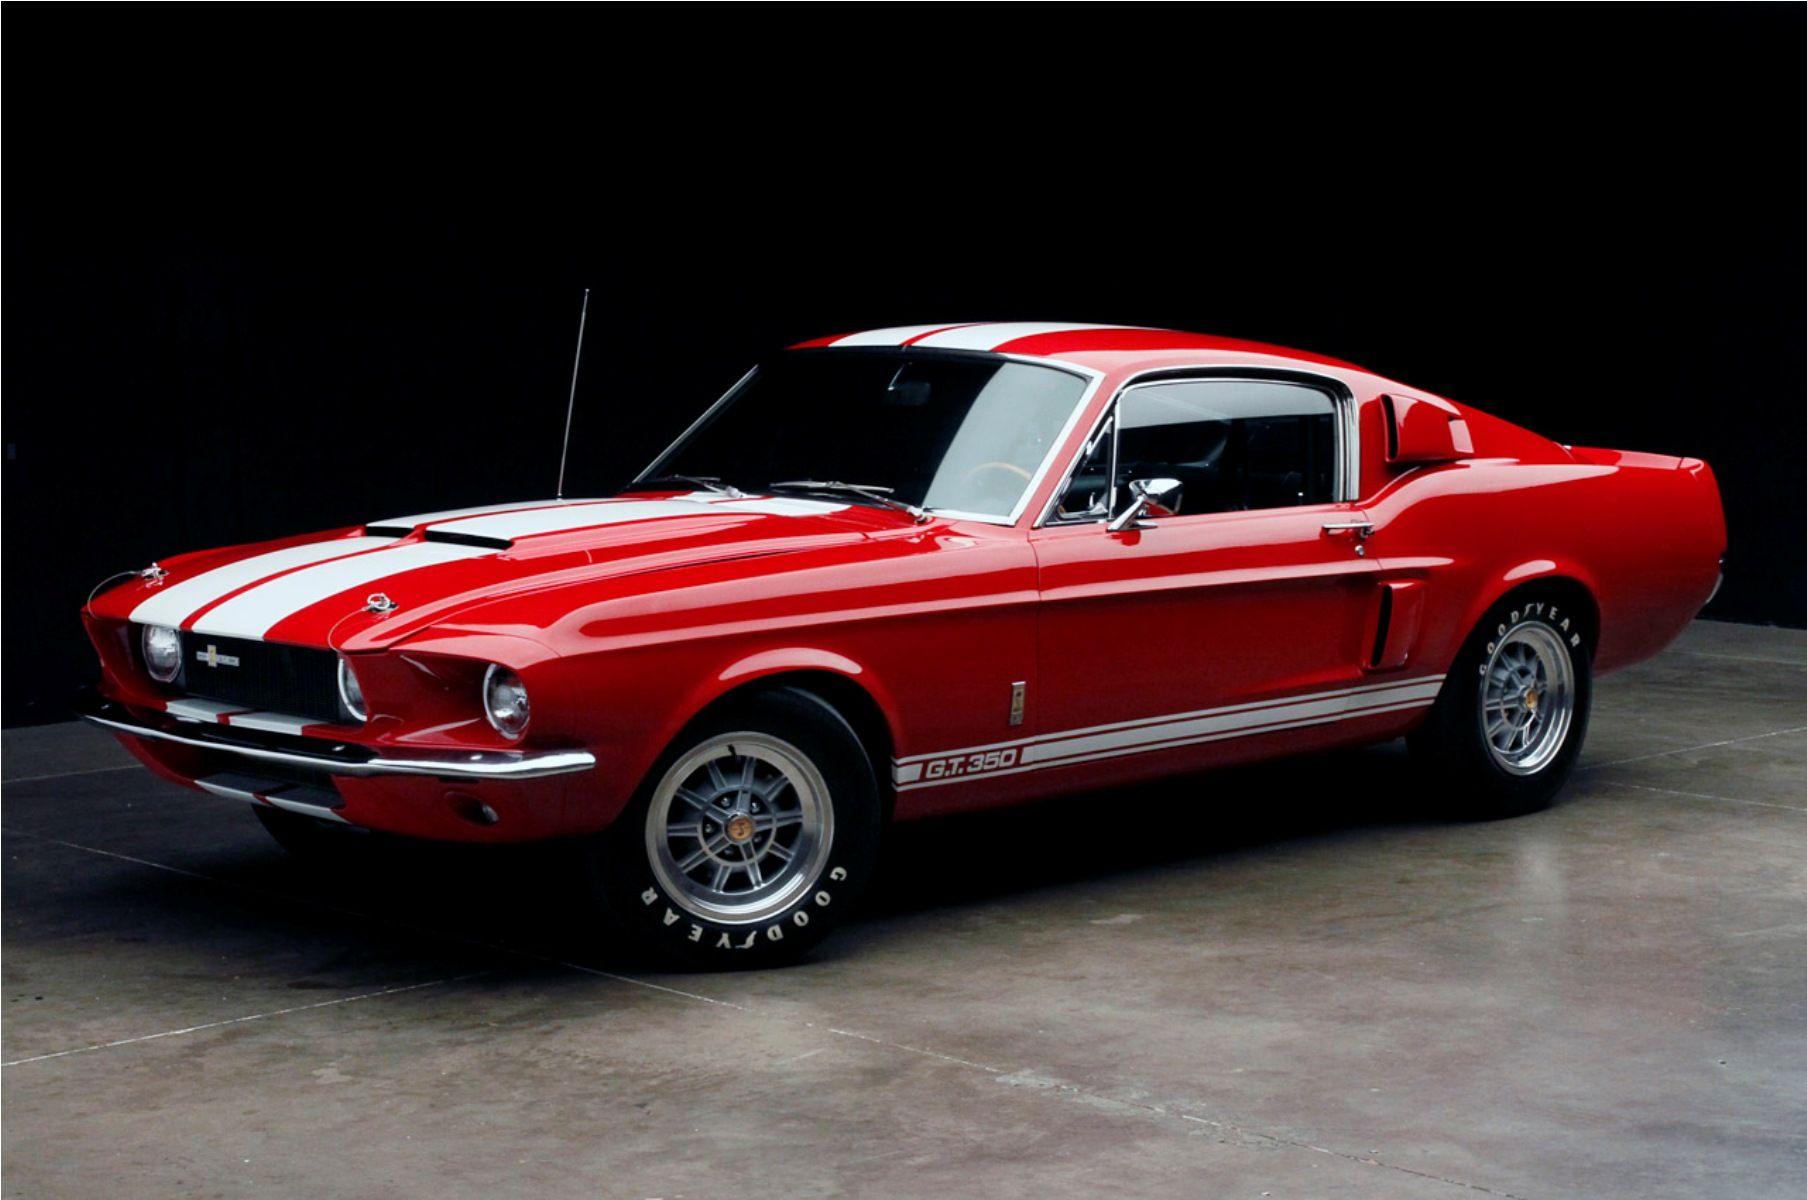 Ford Mustang 1967 Great HD Wallpaper Ford Wallpaper